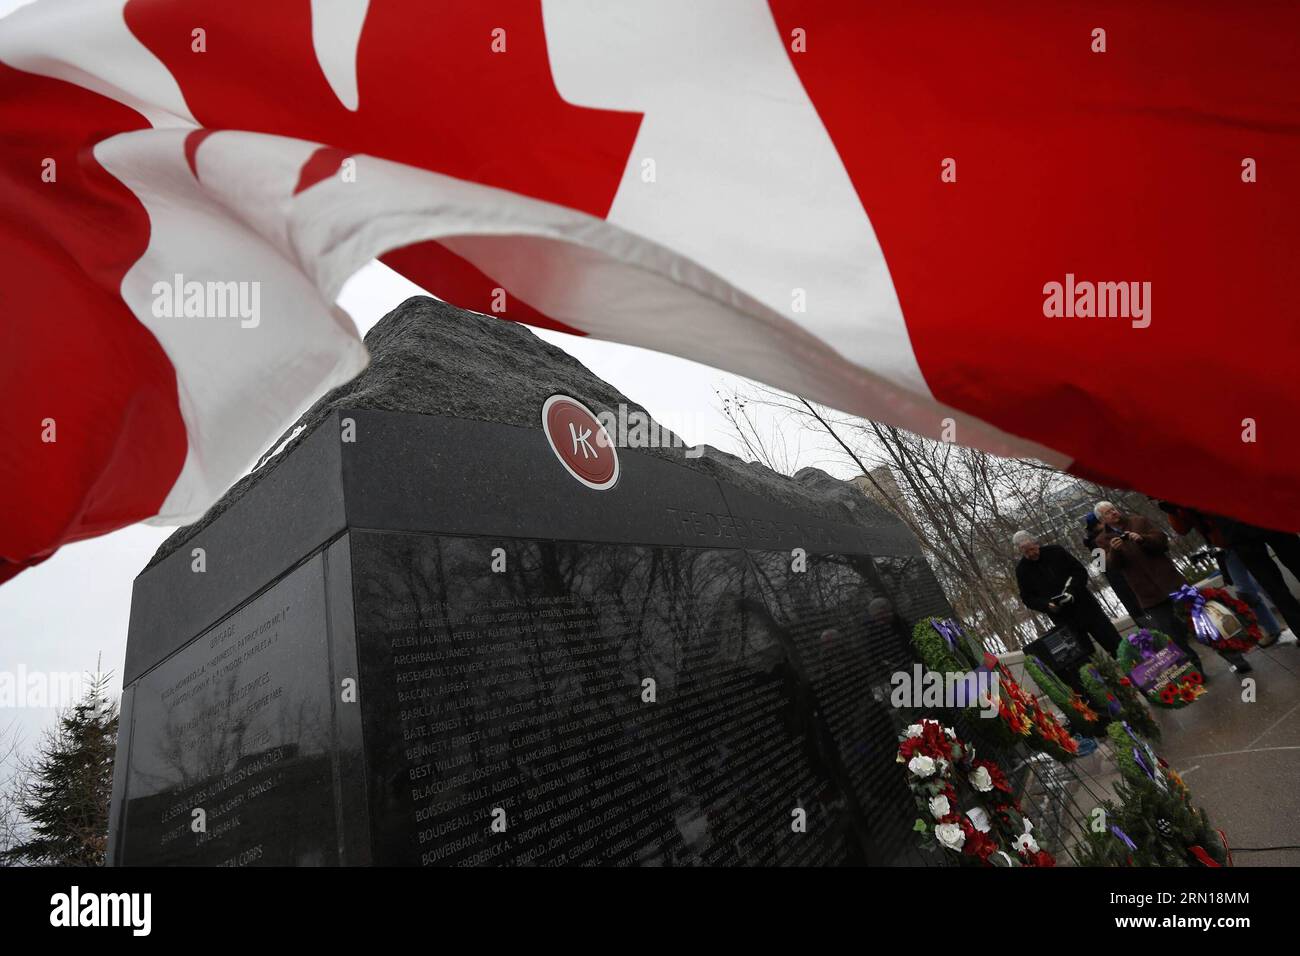 (141206) -- OTTAWA, Dec. 6, 2014 -- People participate in a ceremony to commemorate Canadian soldiers who fought in defense of Hong Kong, China, against the Japanese during WWII at Canadian Force Memorial Wall in Ottawa, Canada, on Dec. 6, 2014. In 1941, about 1,975 Canadian soldiers fought in Hong Kong for 18 days against Japanese troops who outnumbered them. About 290 of them were killed in the battle. ) CANADA-OTTAWA-HONG KONG BATTLE-COMMEMORATION DavidxKawai PUBLICATIONxNOTxINxCHN   Ottawa DEC 6 2014 Celebrities participate in a Ceremony to commemorate Canadian Soldiers Who fought in Defen Stock Photo